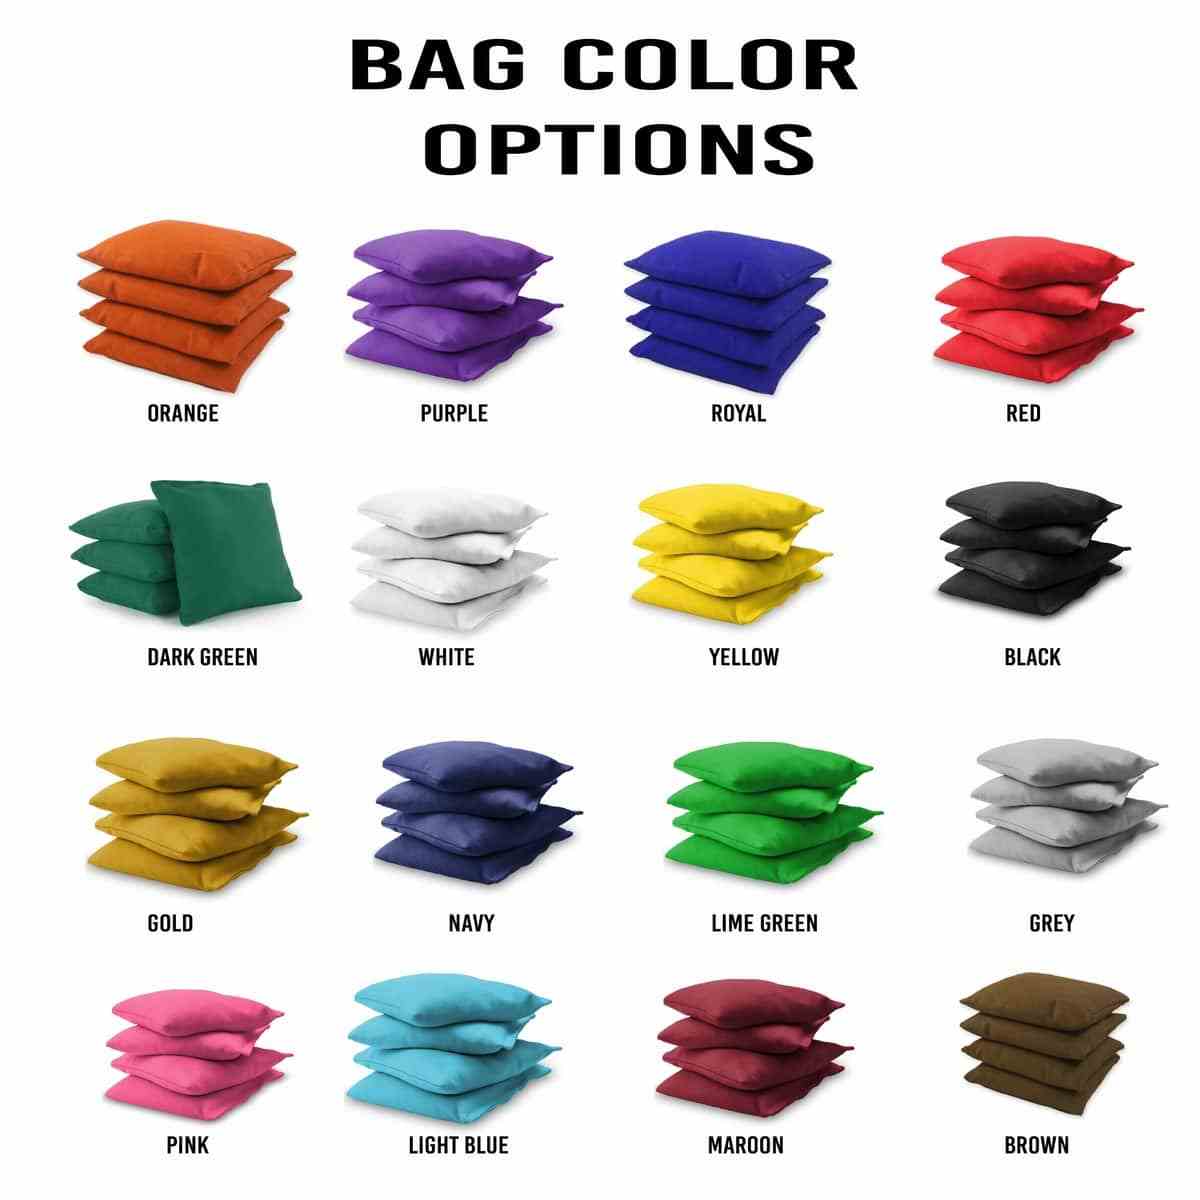 Army Wife 2x4 bag colors